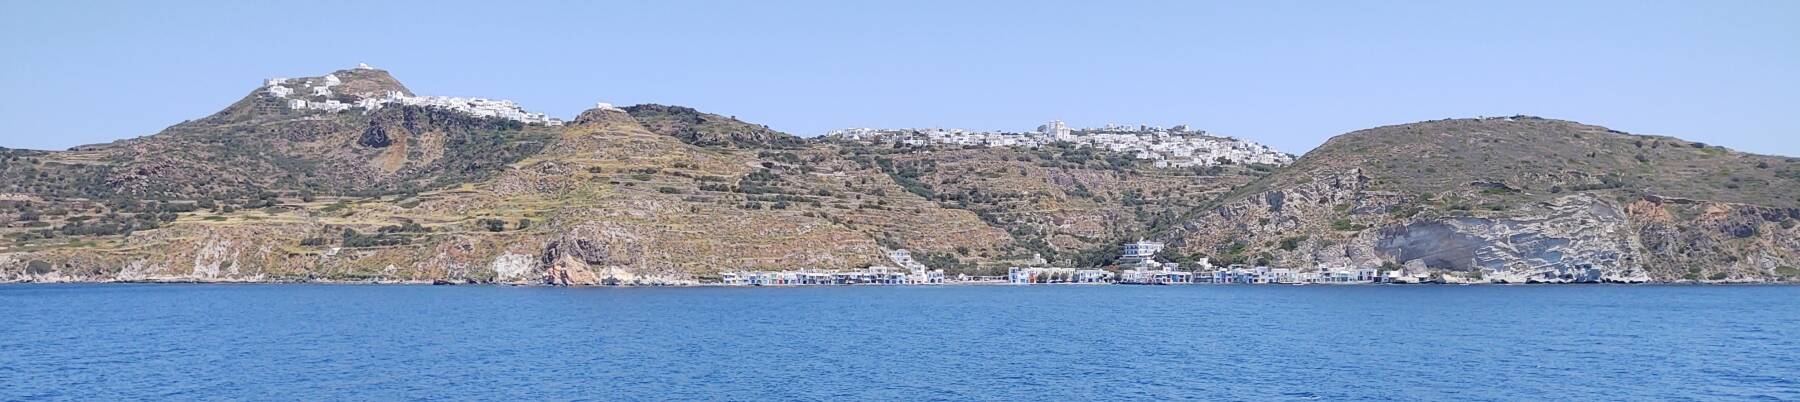 Plaka and Trypiti on Milos seen from the ferry from Folegandros.